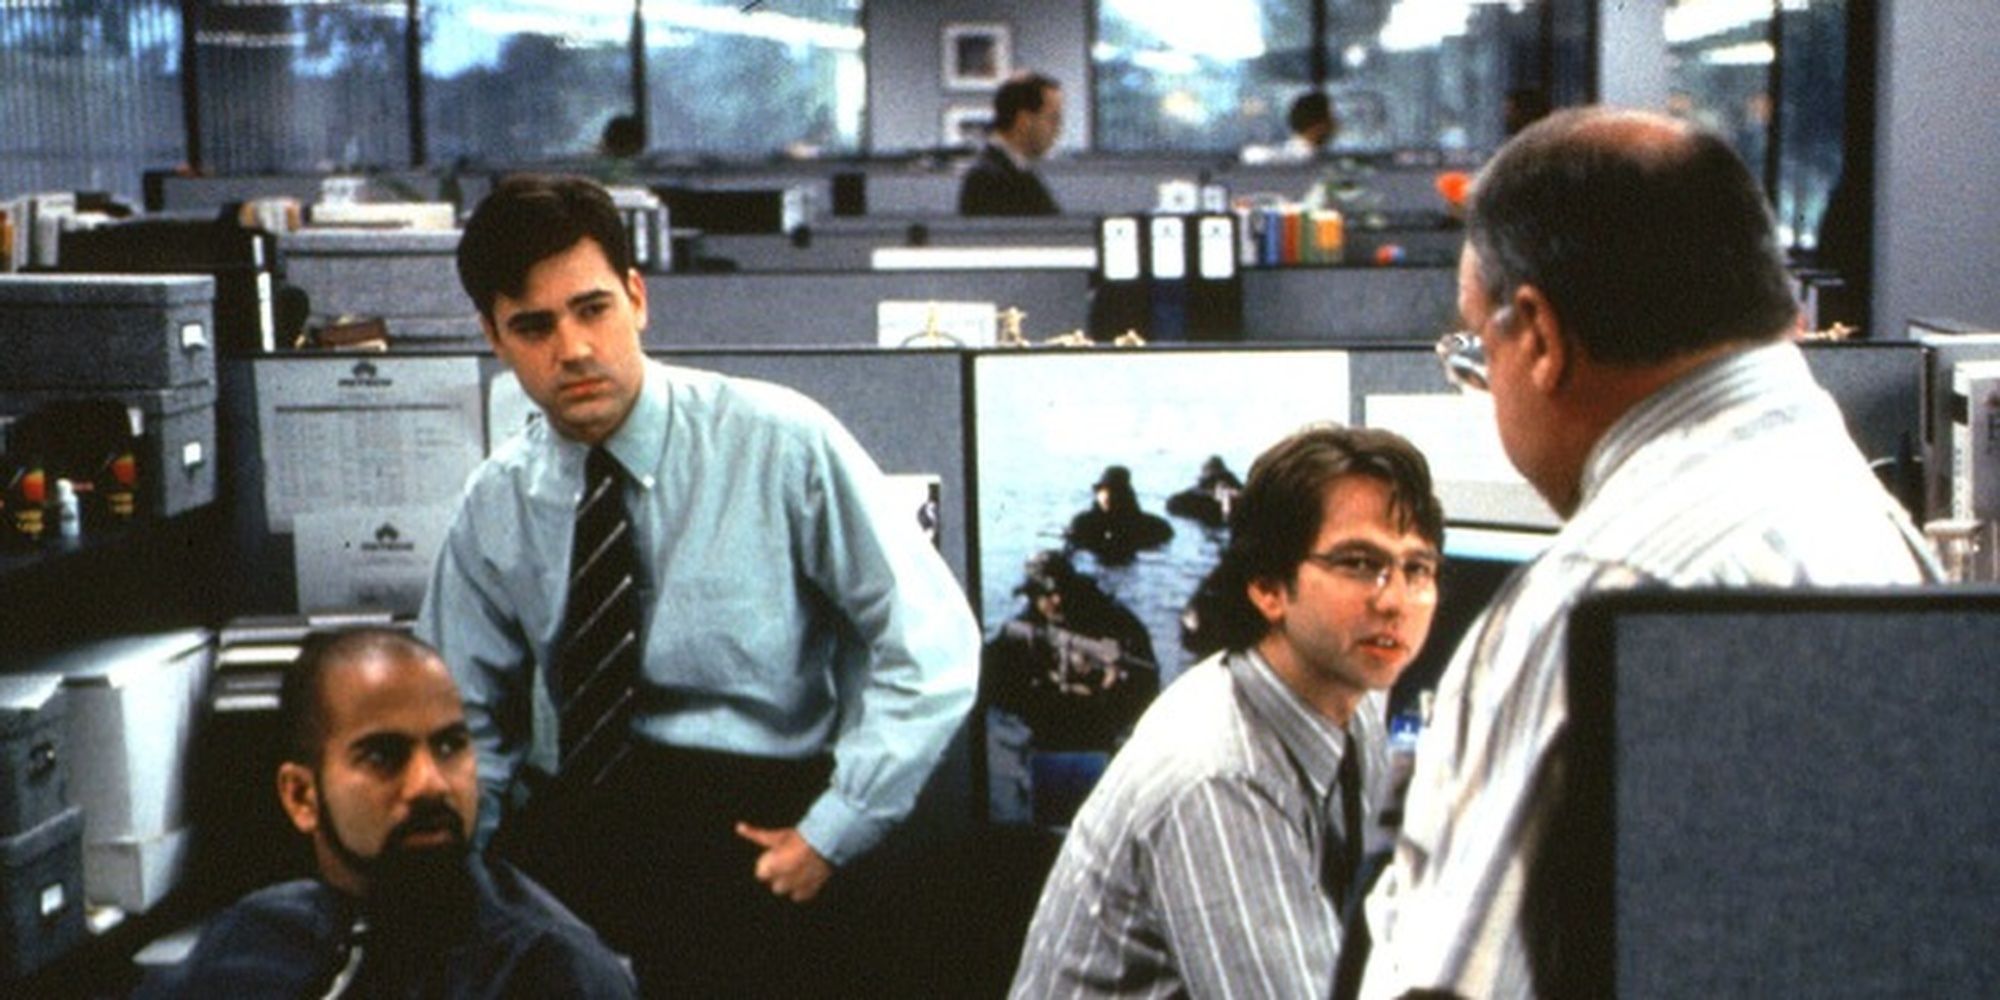 The Cast of Office Space